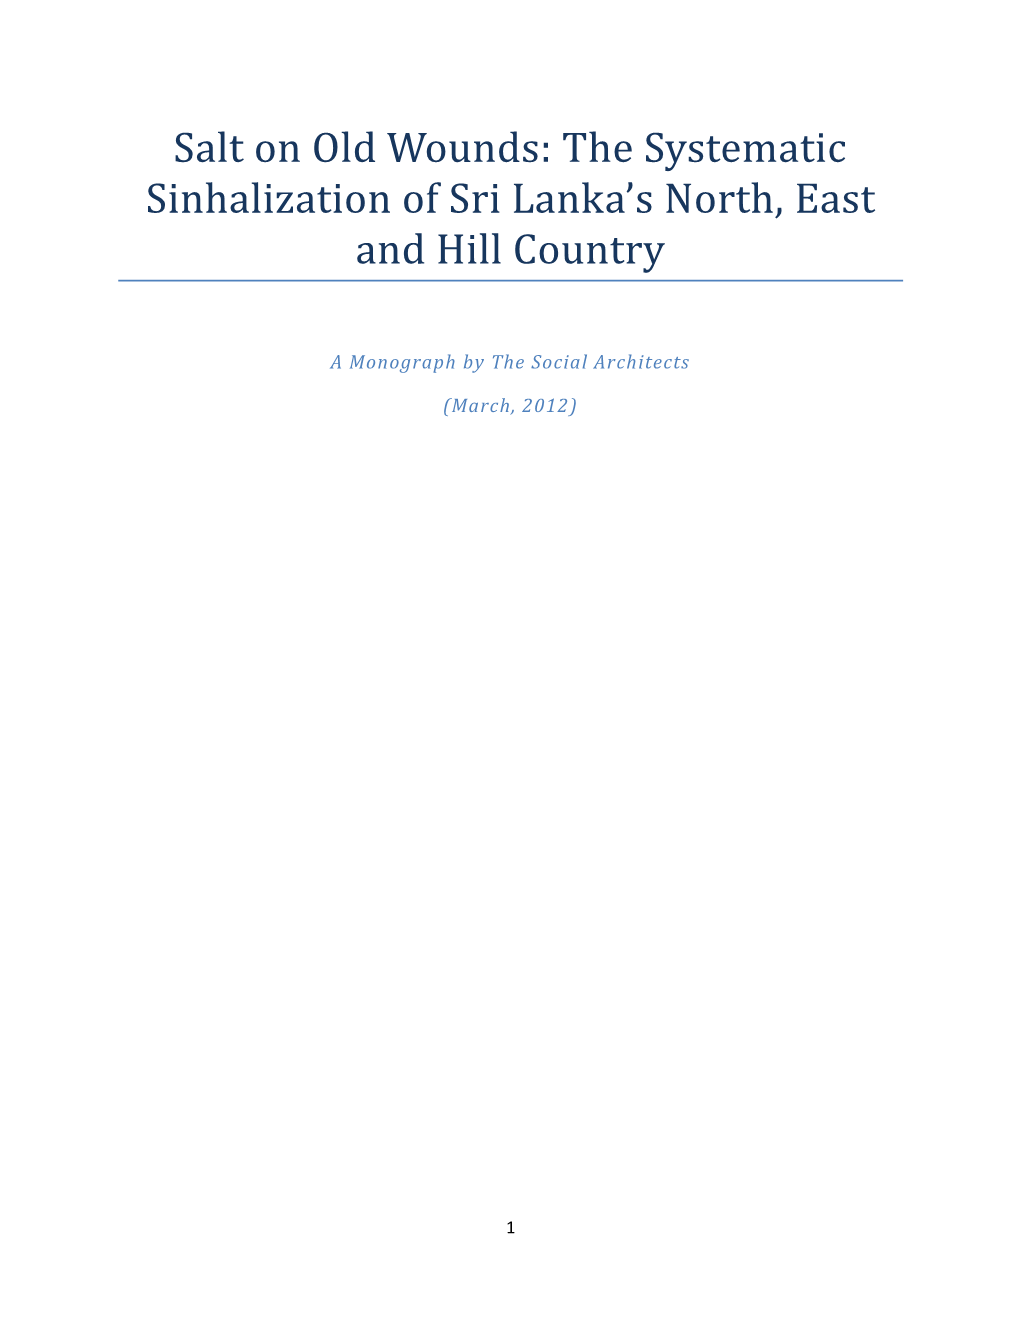 The Systematic Sinhalization of Sri Lankass North, East and Hill Country